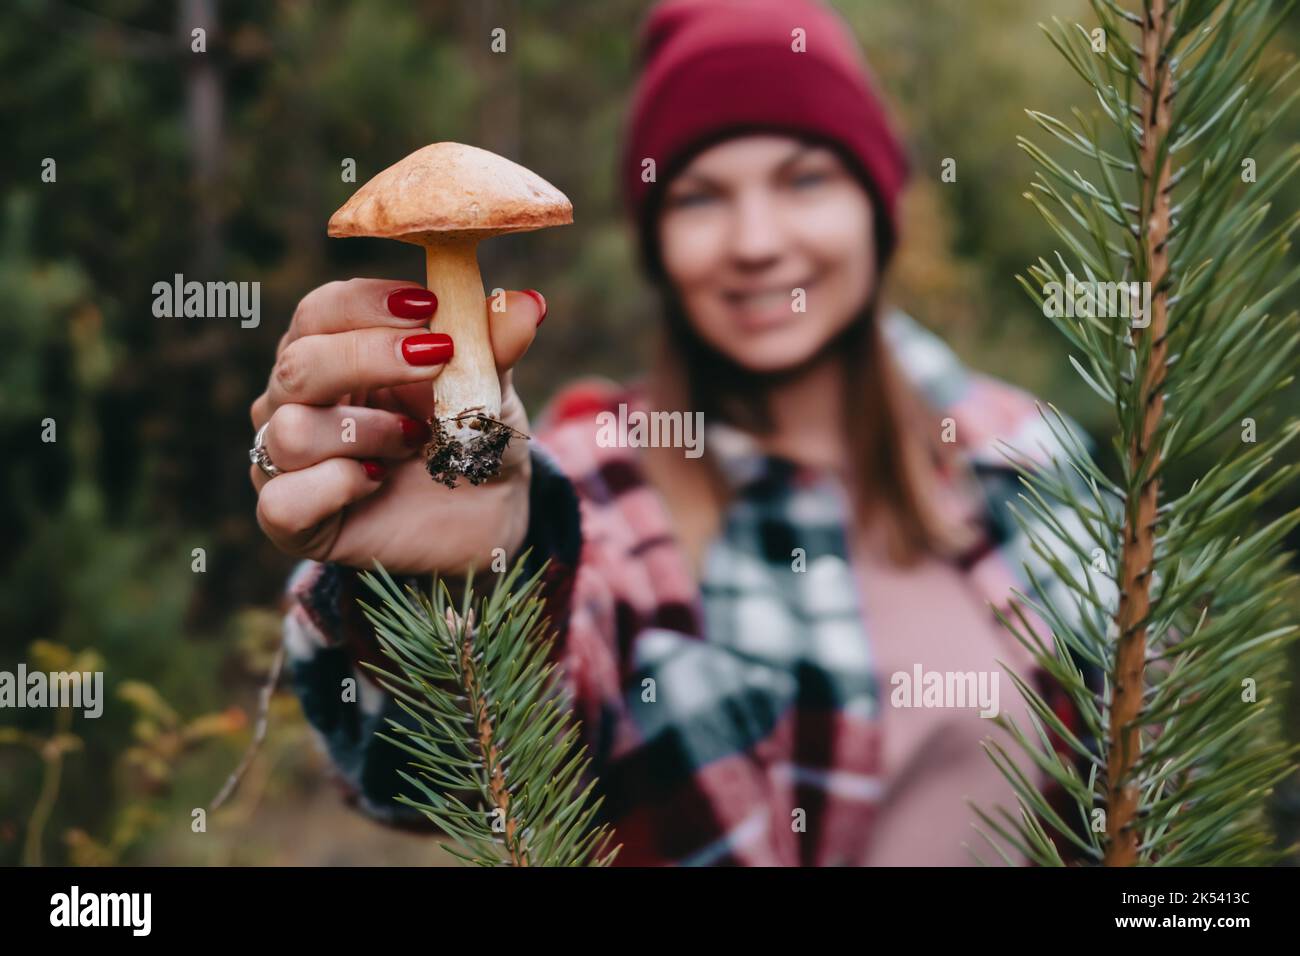 Woman holding slippery Jack Fungi, Suillus luteus on autumn forest background with pine needles, close-up view. Harvest mushroom concept Stock Photo